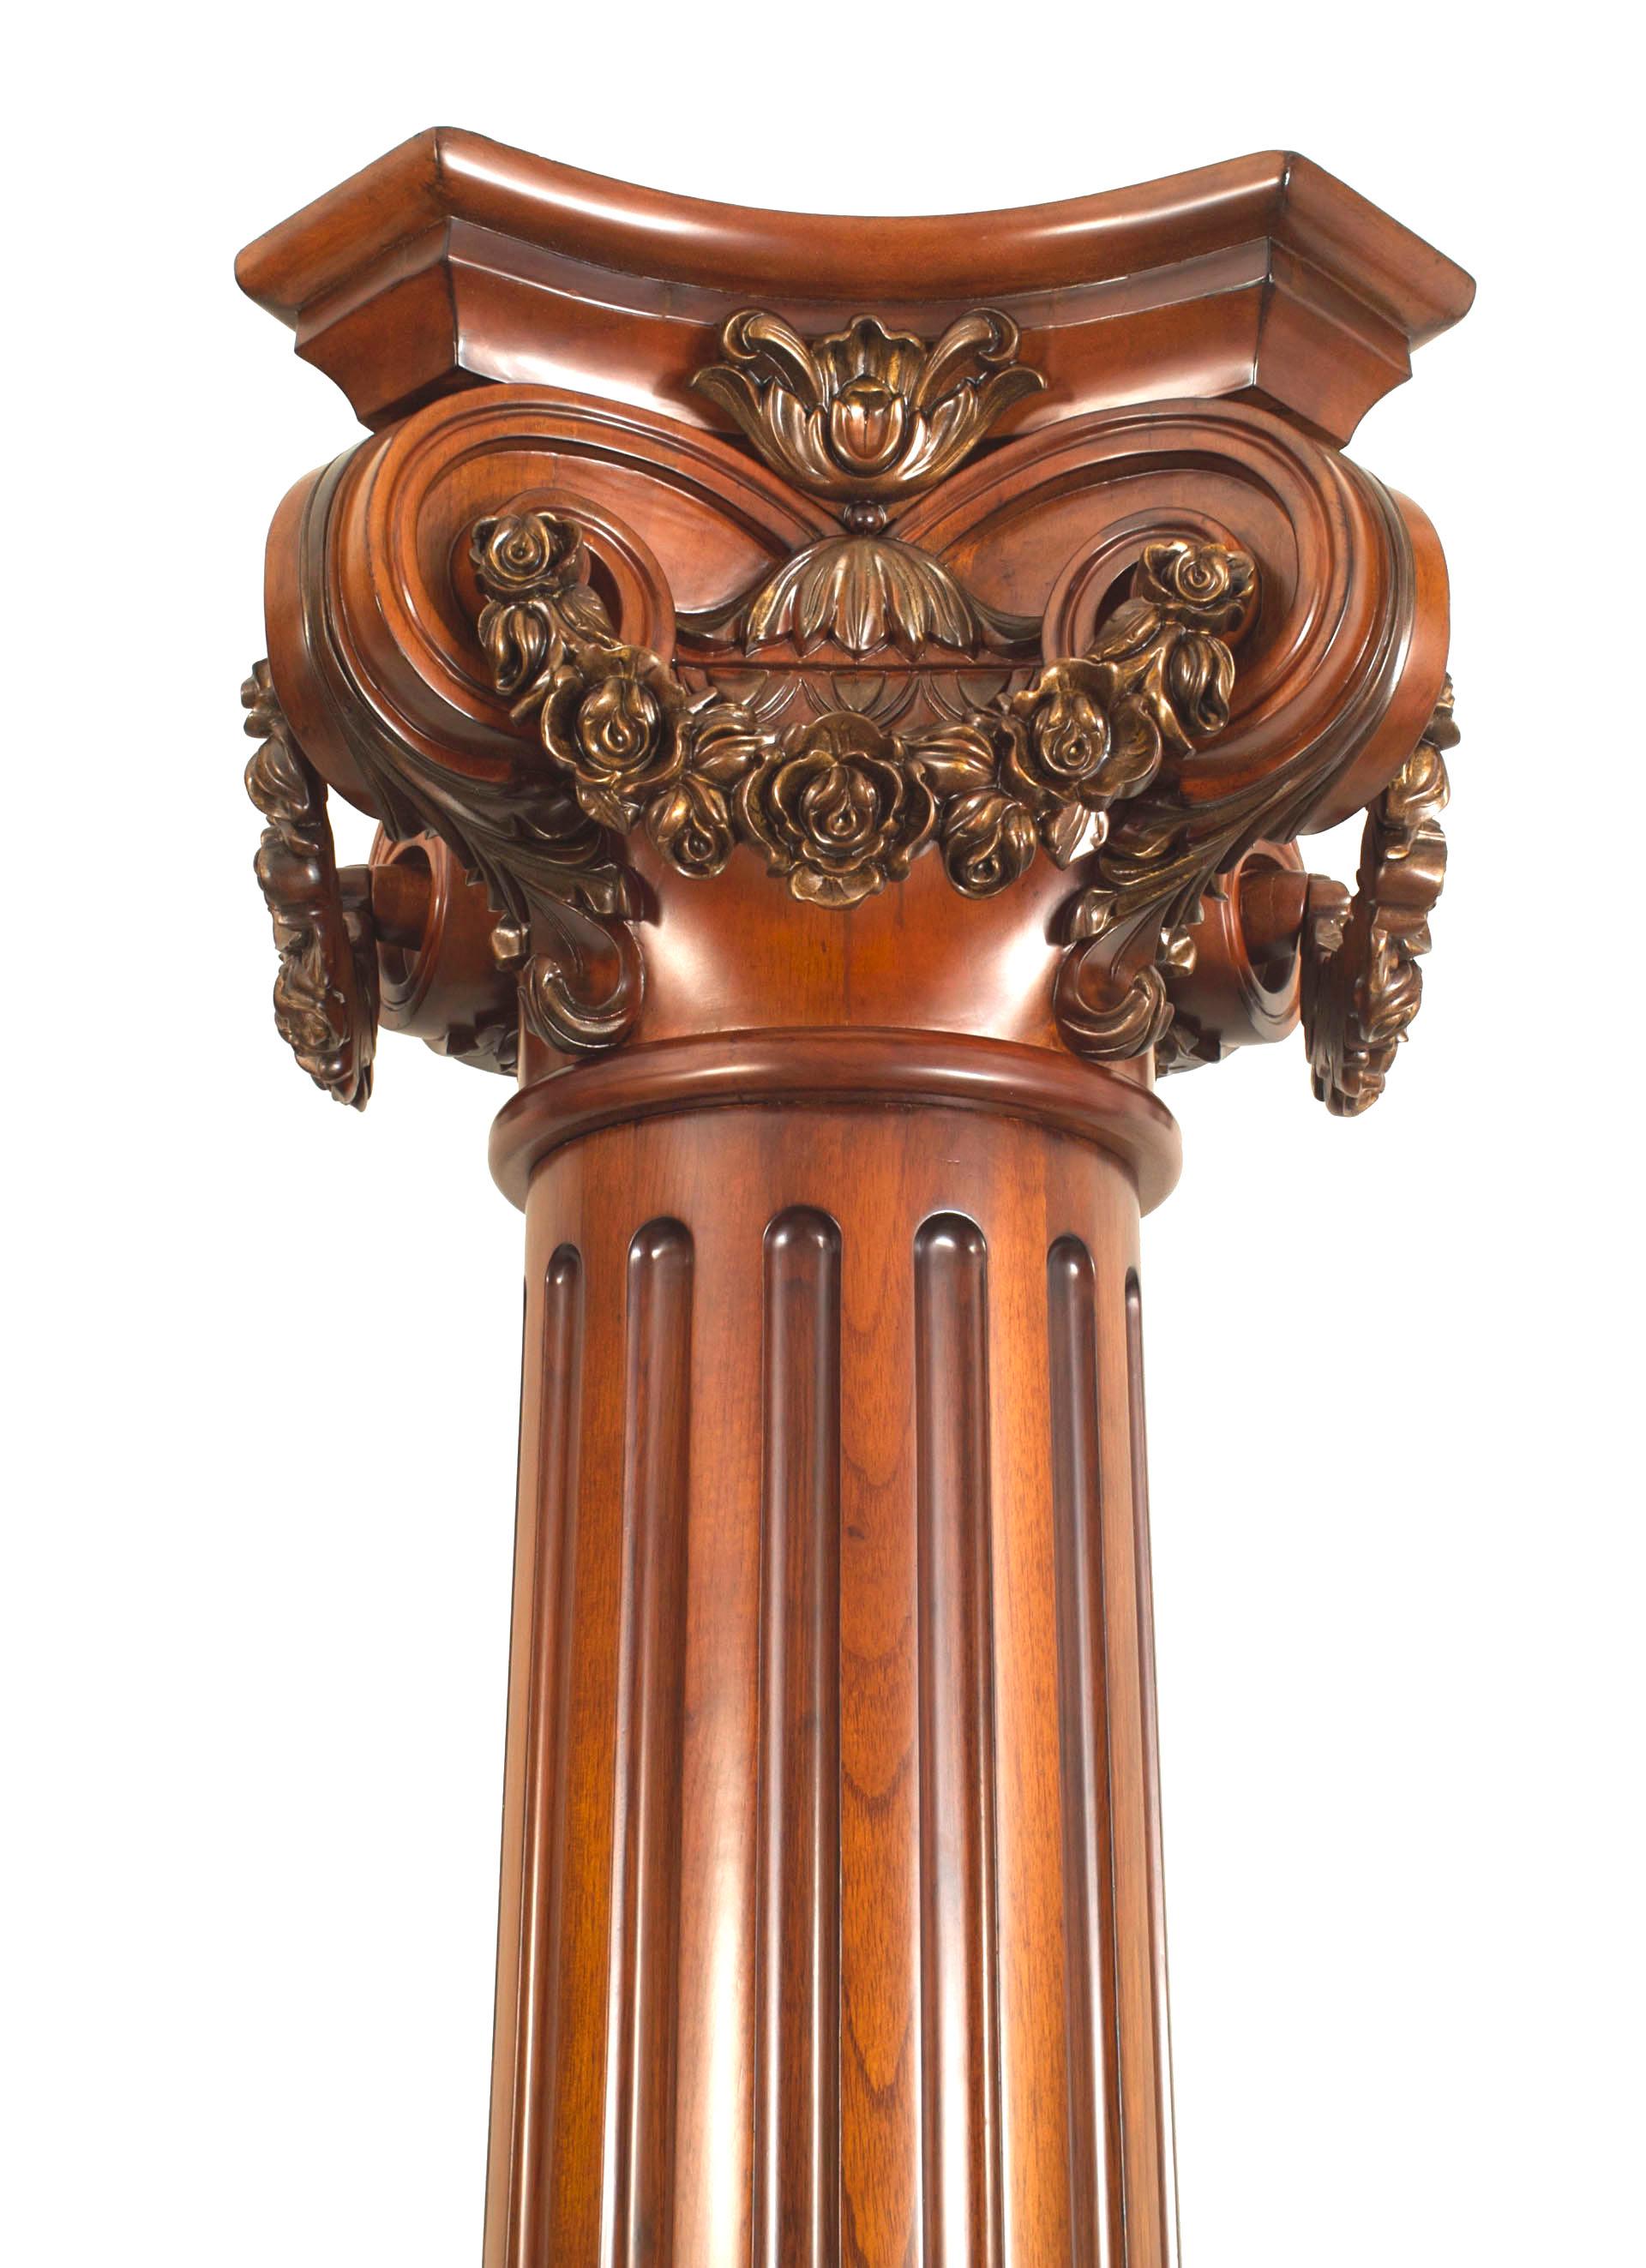 Pair of English Georgian style (20th Century) mahogany fluted large columns with a carved capital having a garland and resting on a square base (PRICED AS Pair).
